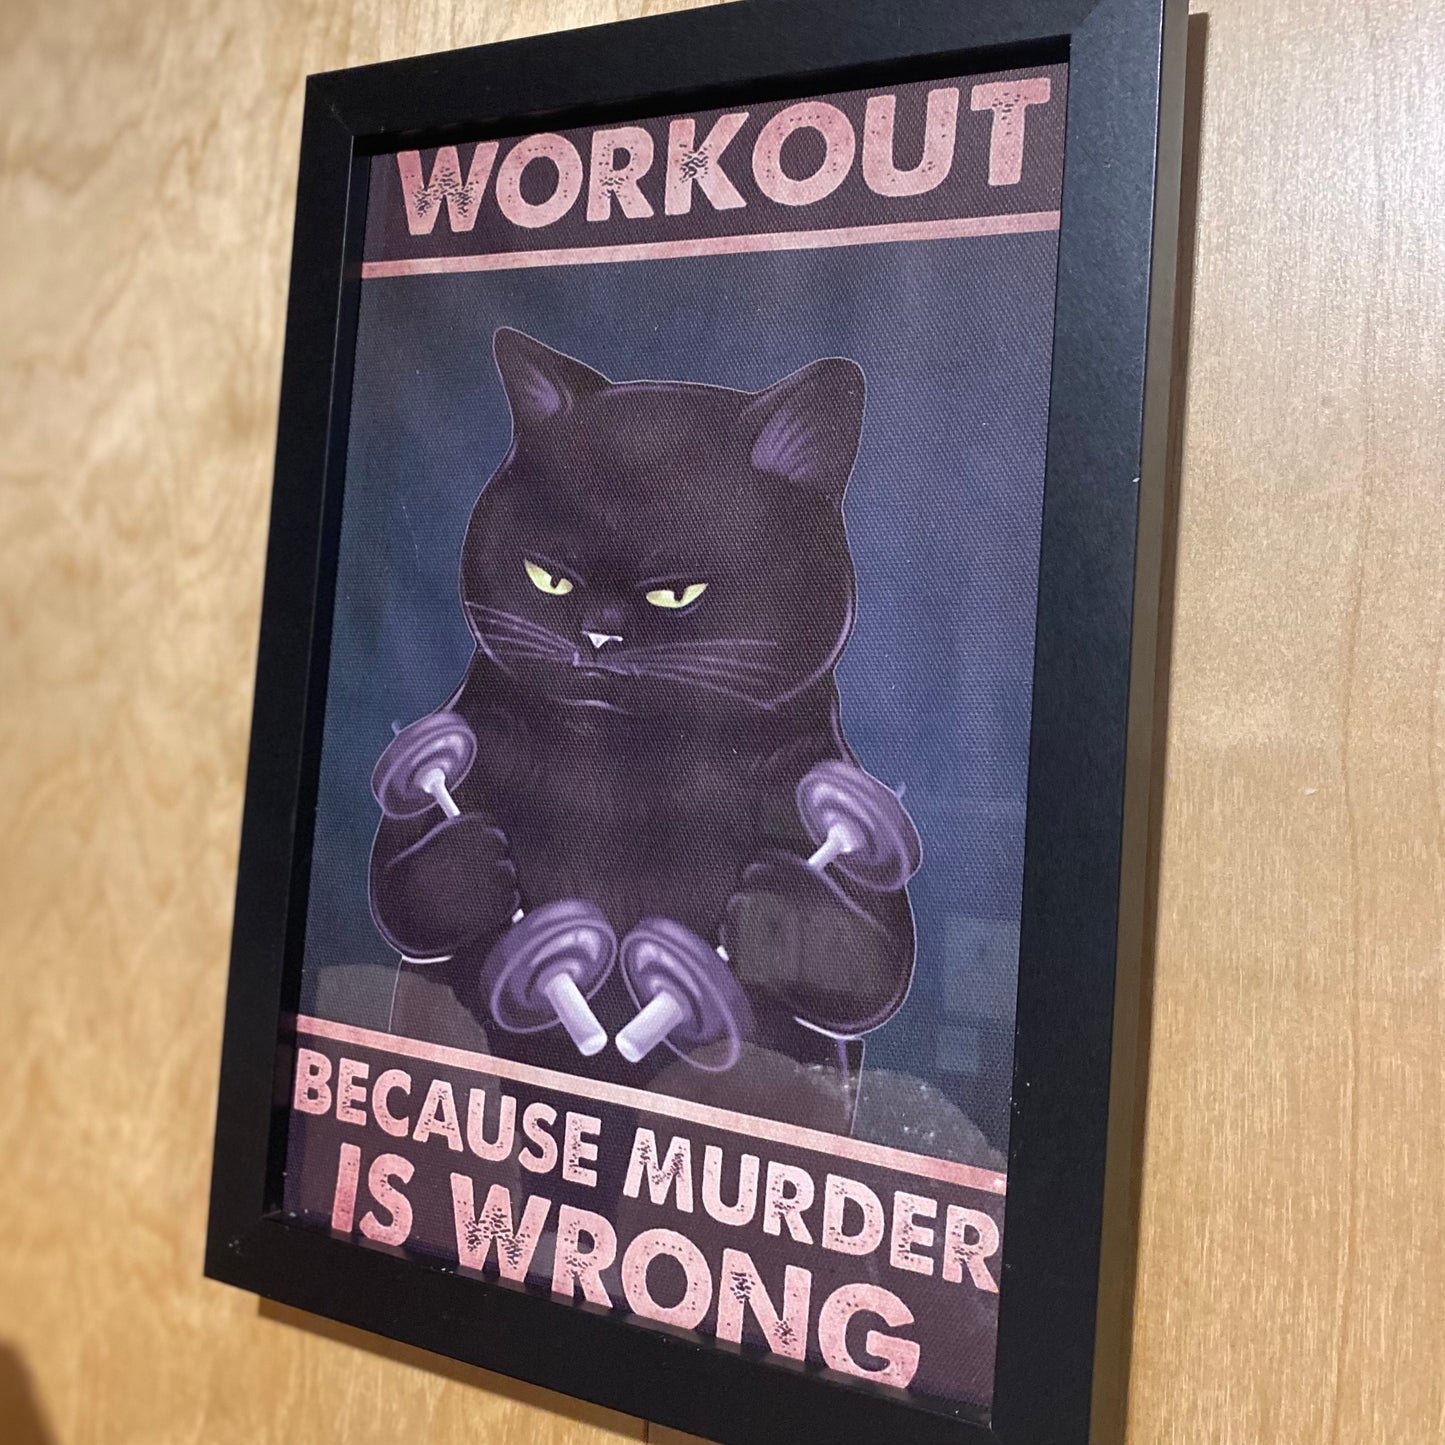 Workout because Murder is wrong